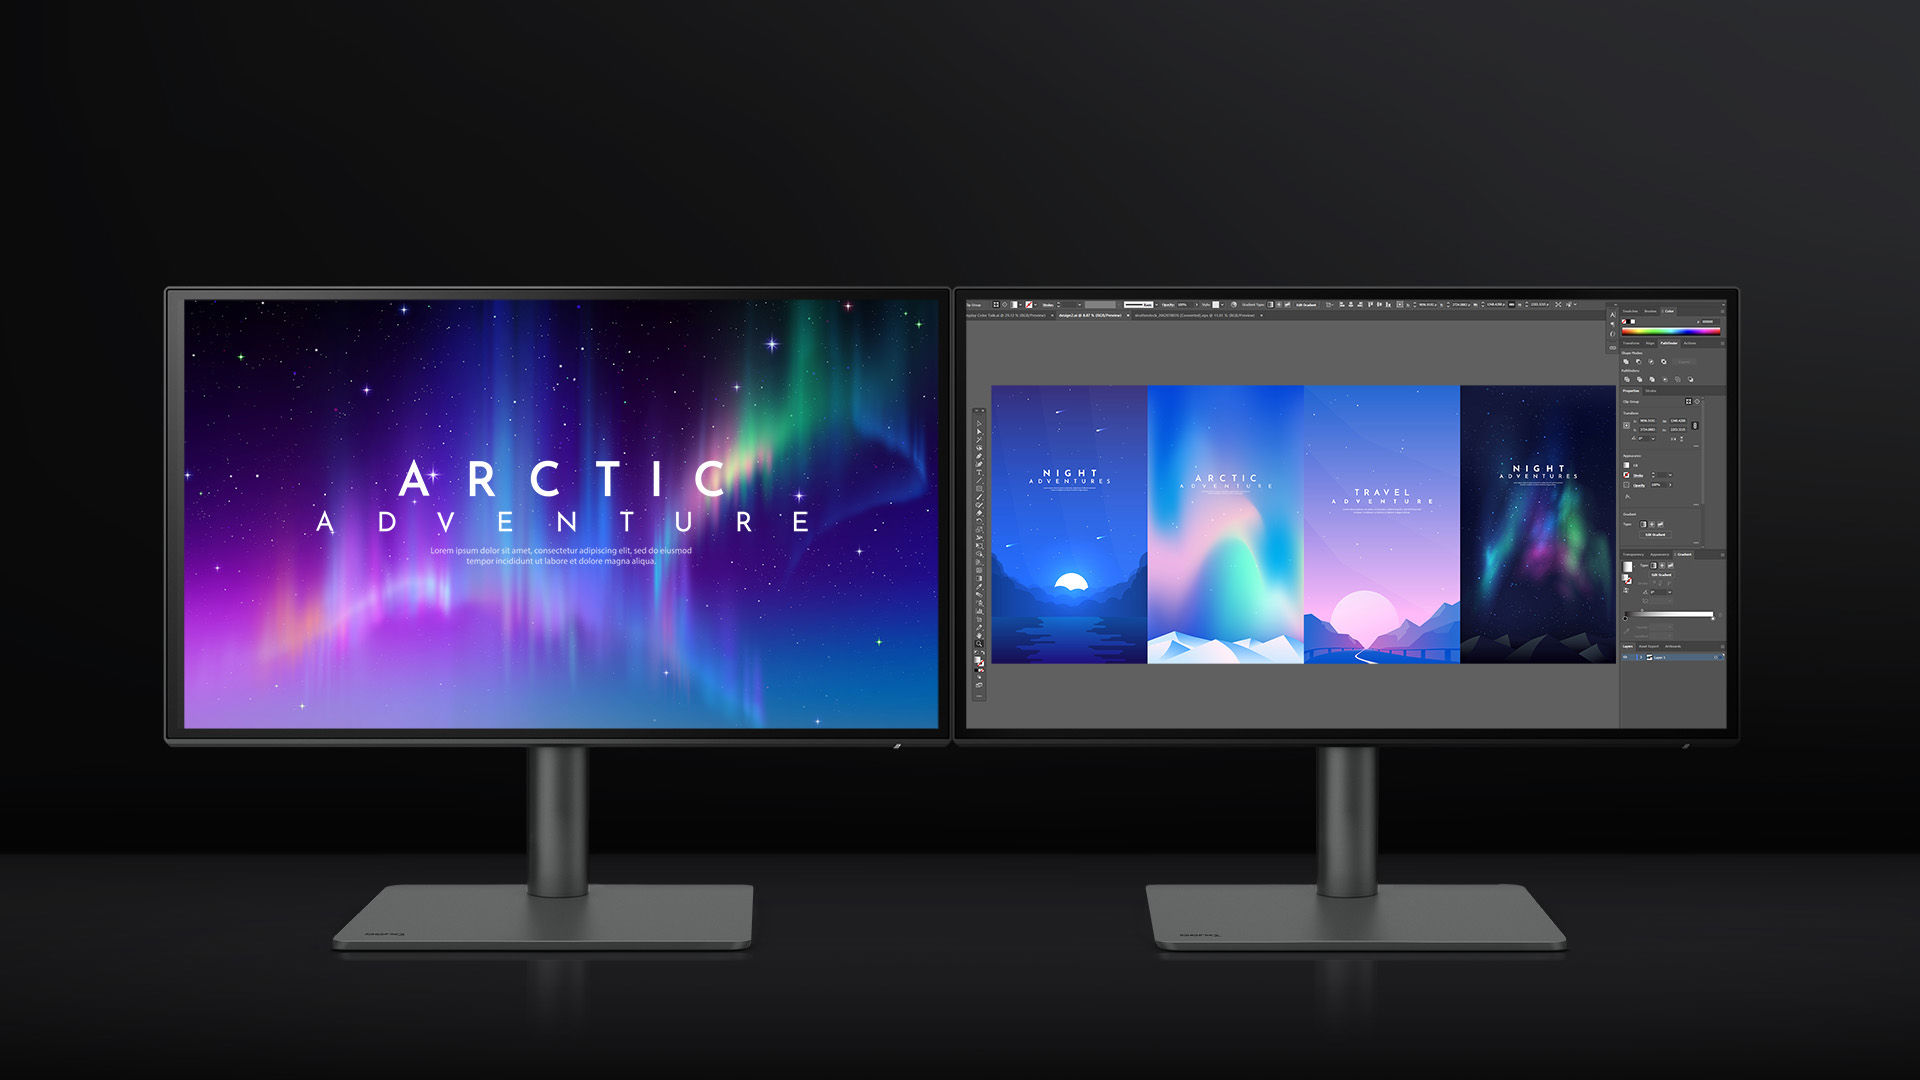 BenQ Display ColorTalk software makes it easy to sync colors across monitors with just a few clicks. Save time and effort, focus on your creativity. 